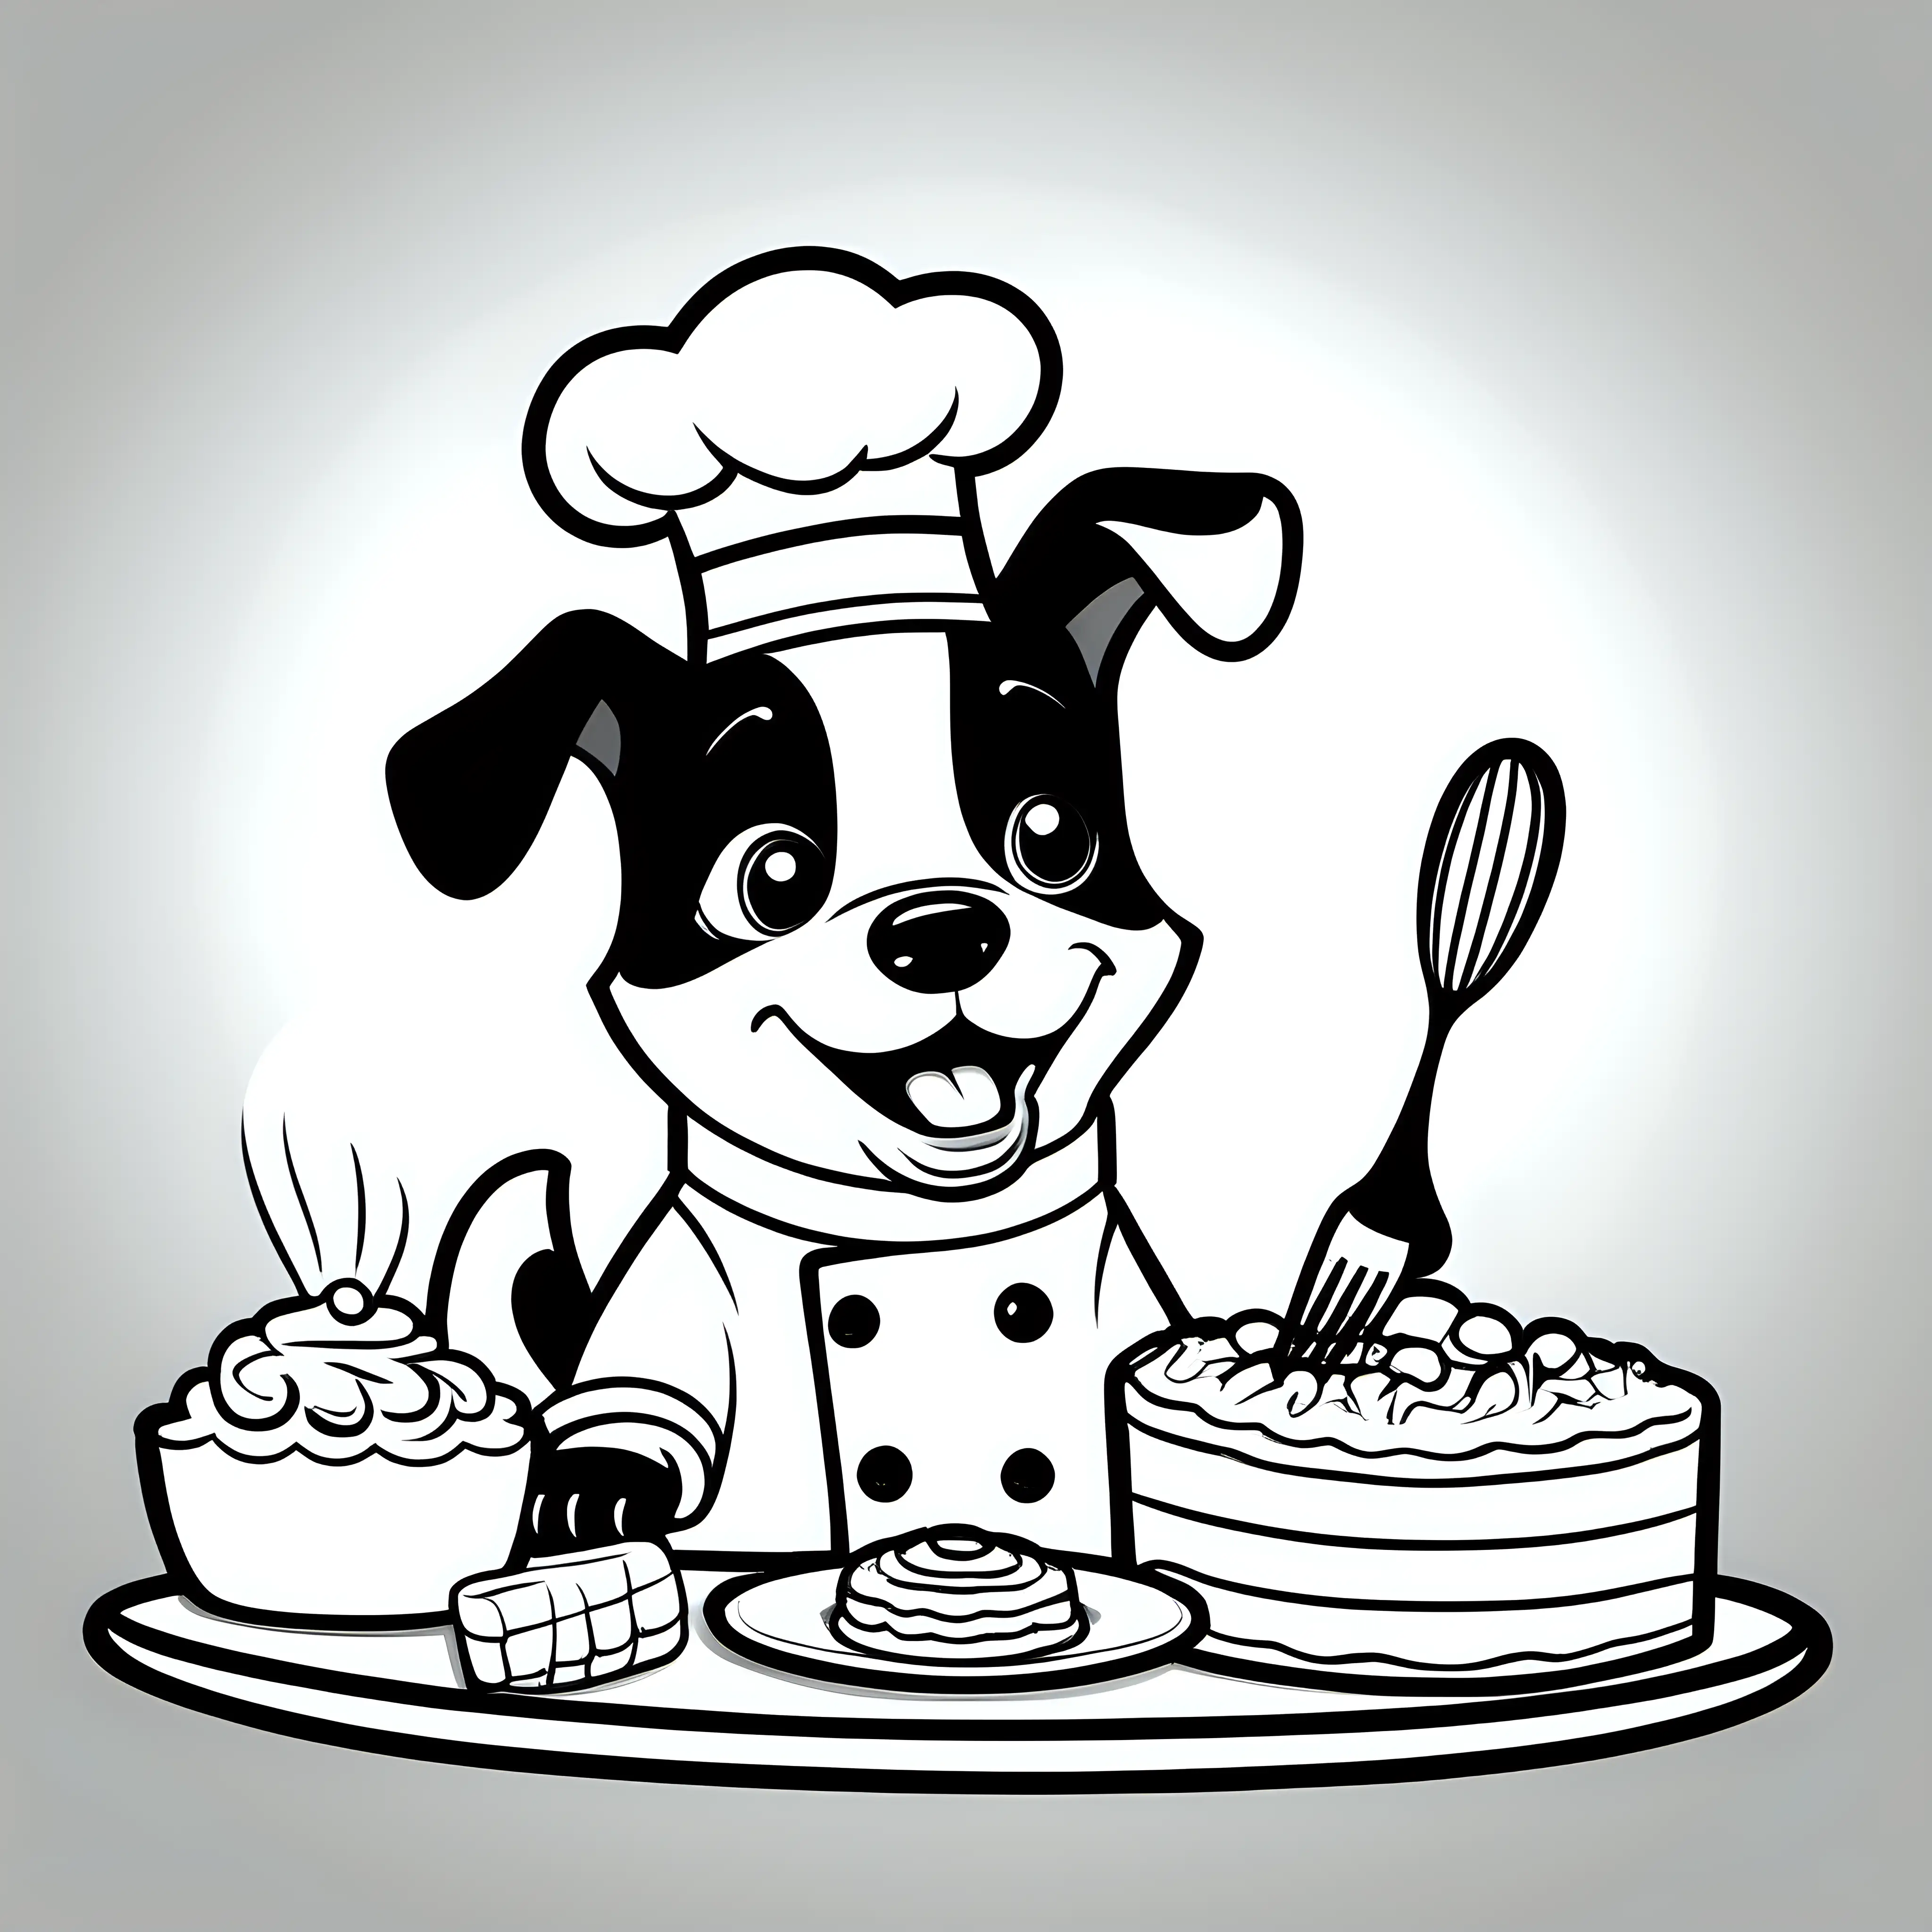 /imagine a cute dog chef, baking a cake - for coloring book with black and white color,  crisp lines and white background –ar 17:22 